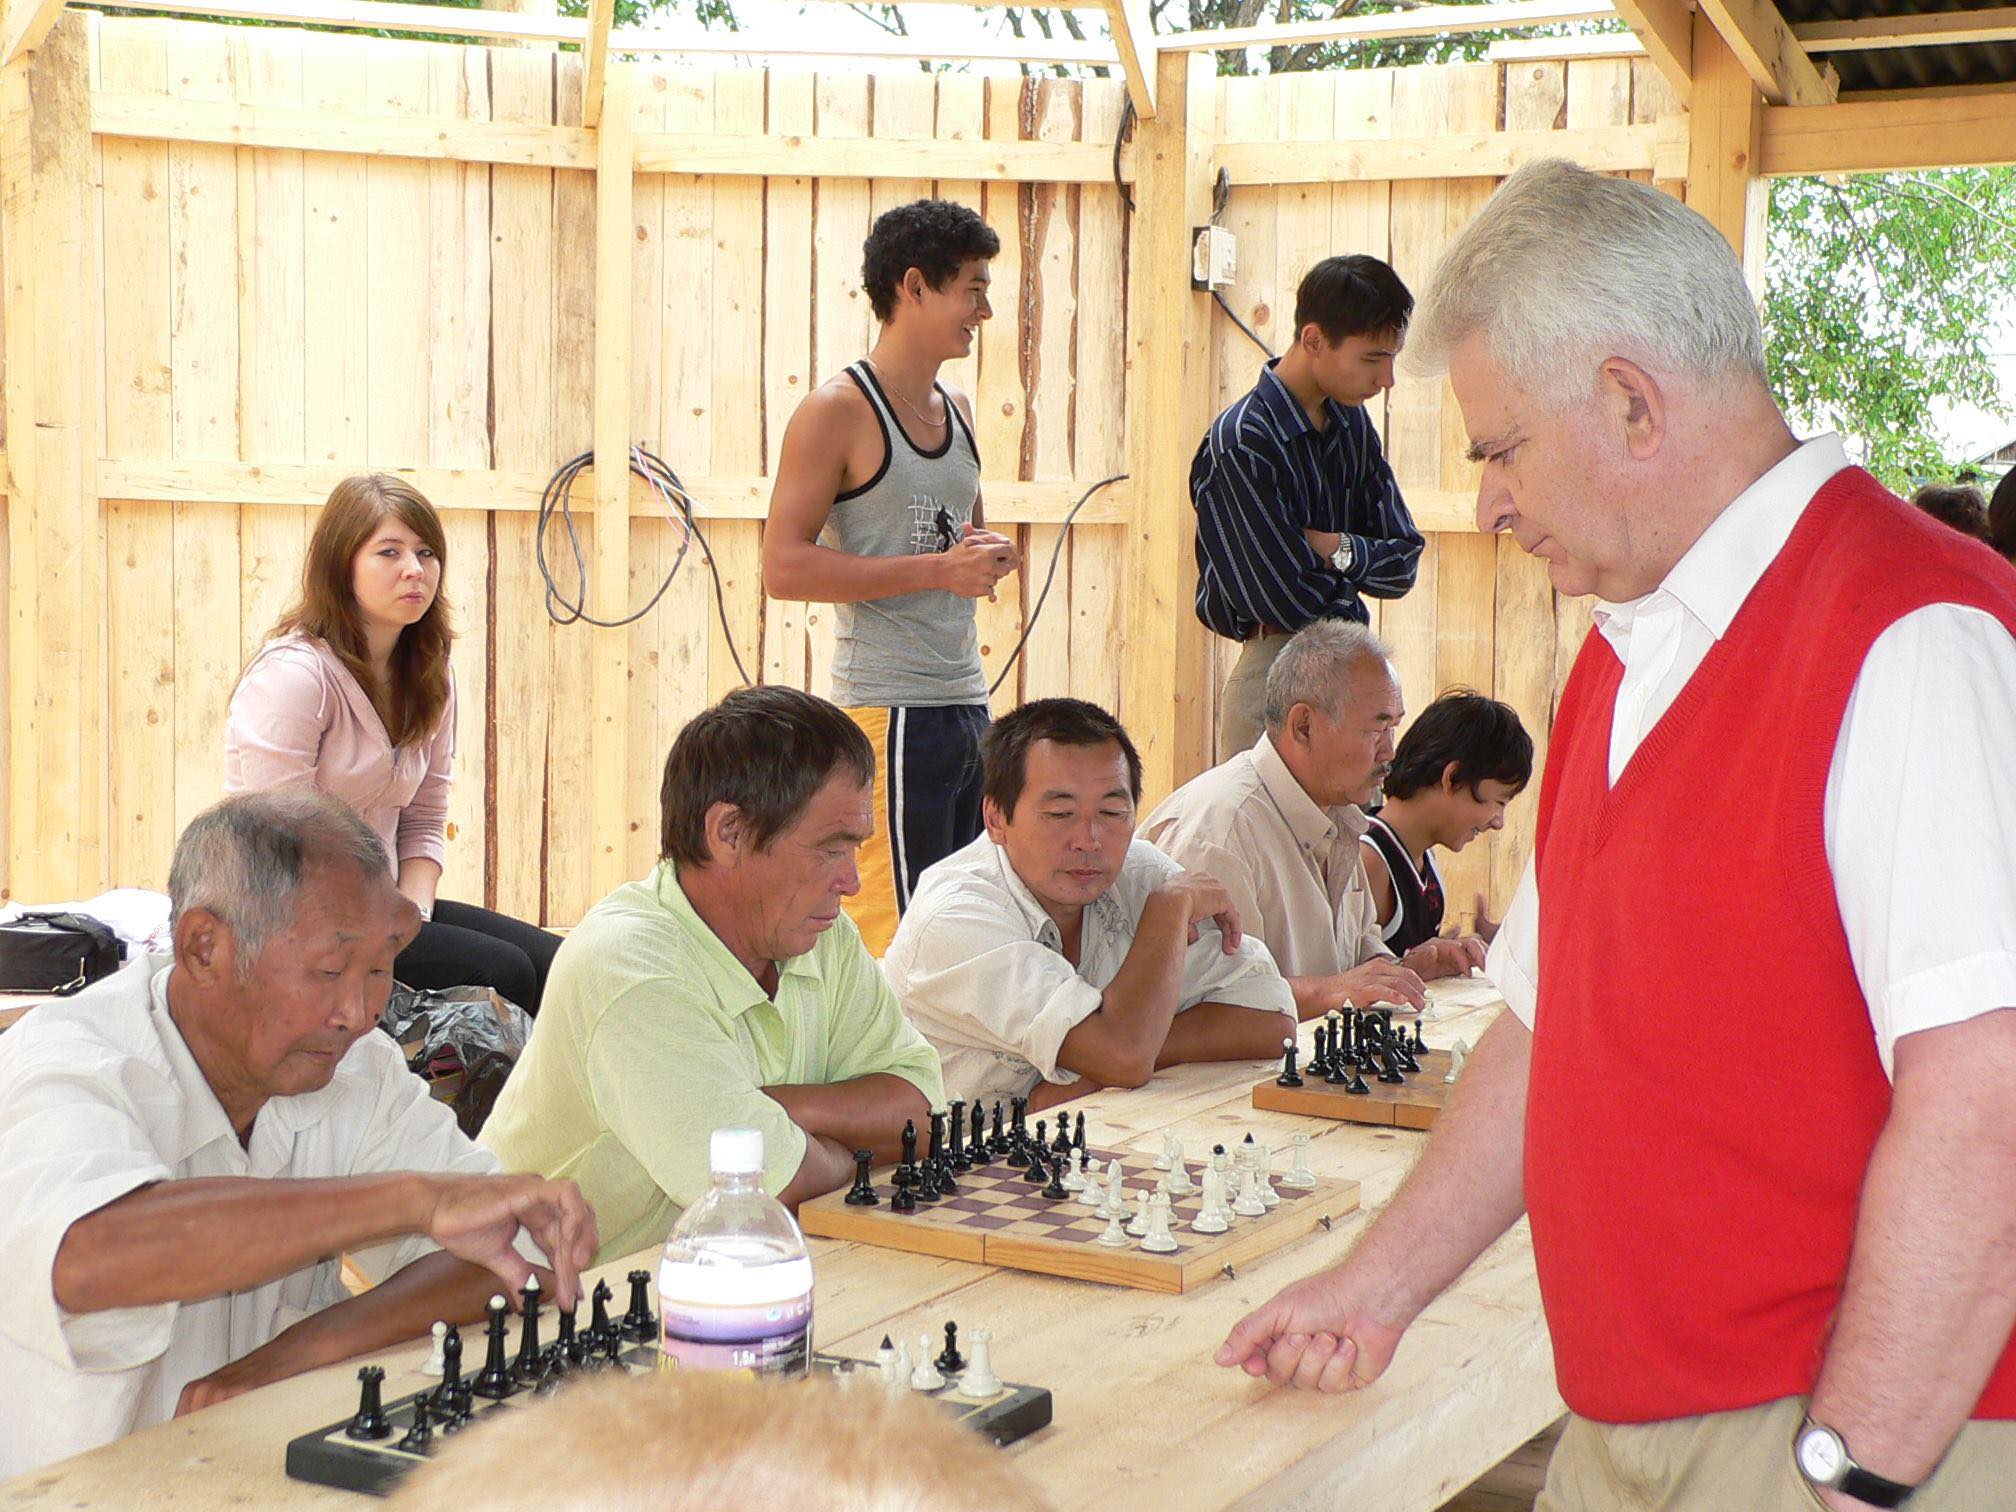 Boris Spassky, Playing in a simultaneous exhibition against…